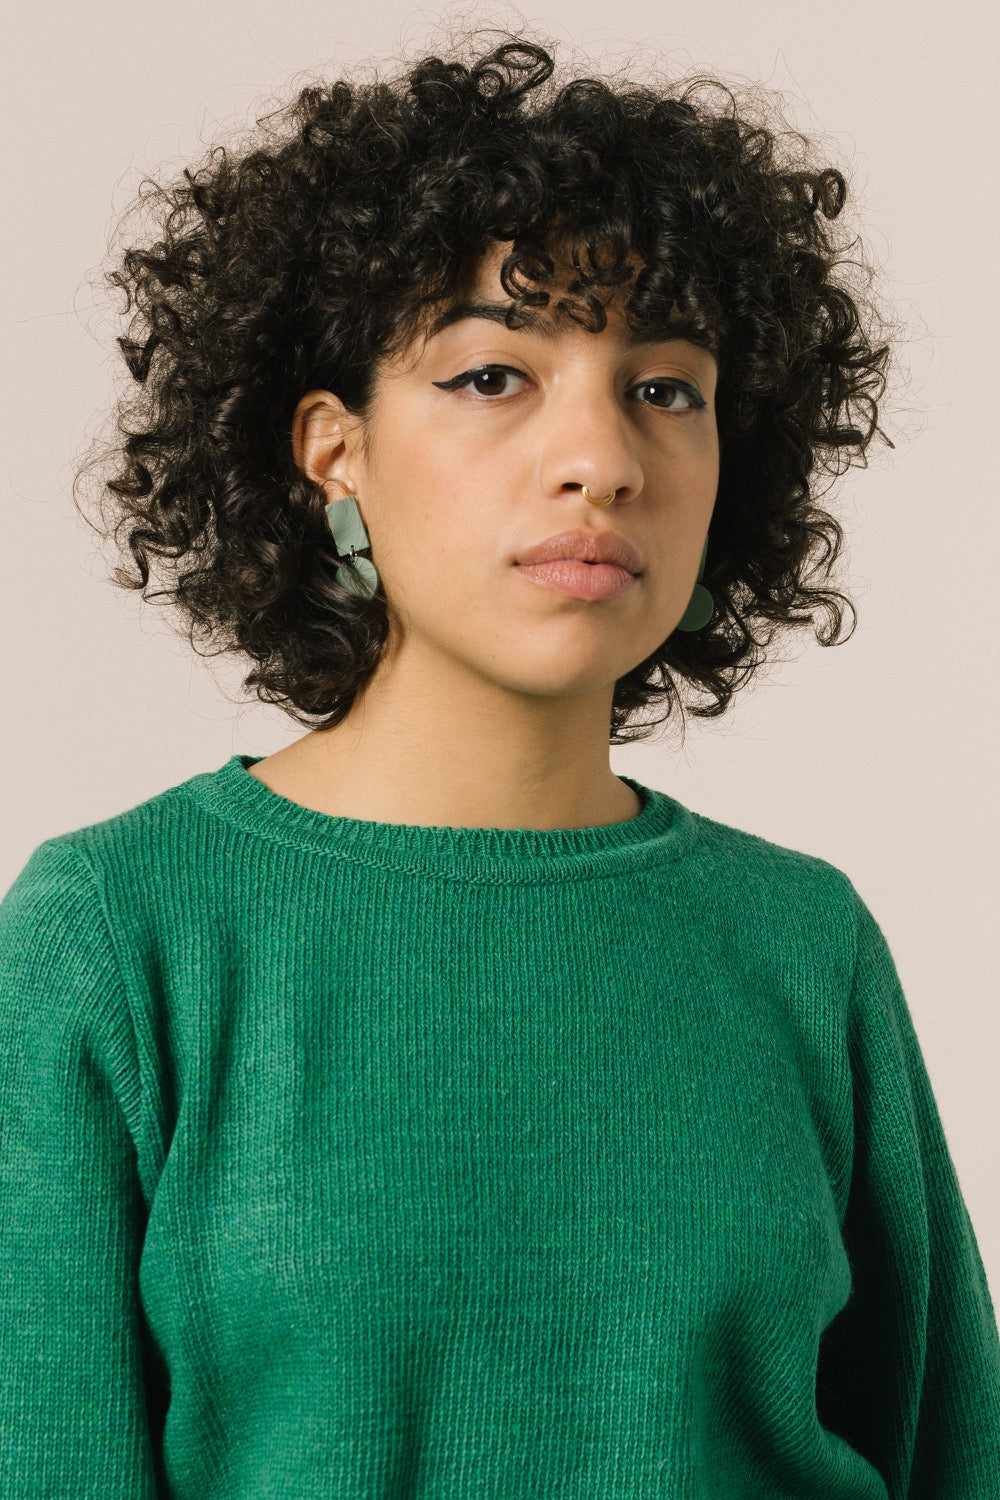 Portrait of the model with the sweater. We can see that the green color is very flattering and can be a note of color in your closet.